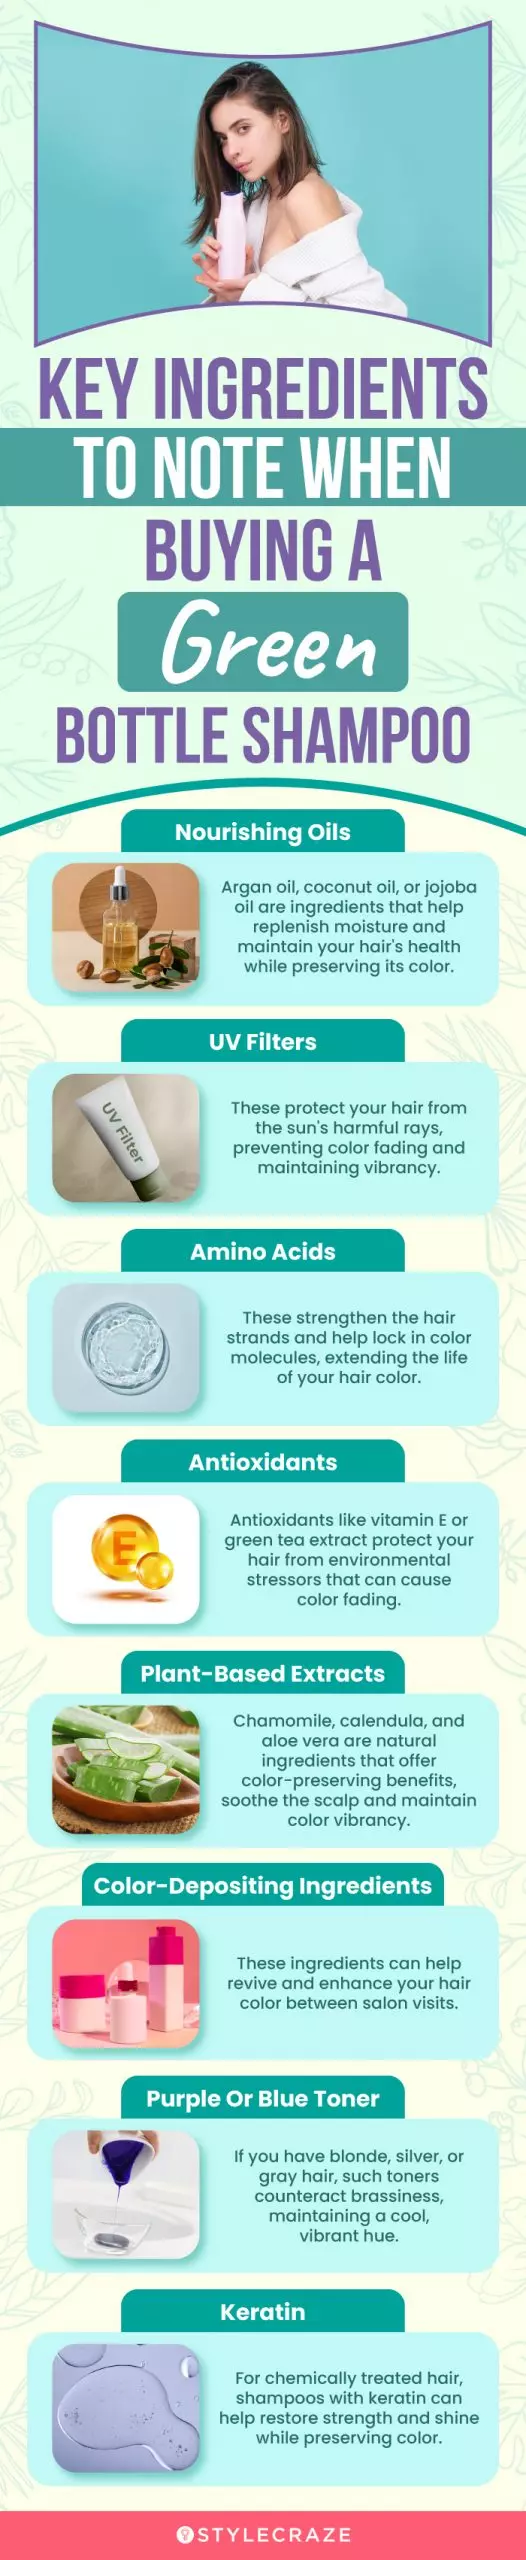 Key Ingredients To Note When Buying A Green Bottle Shampoo (infographic)